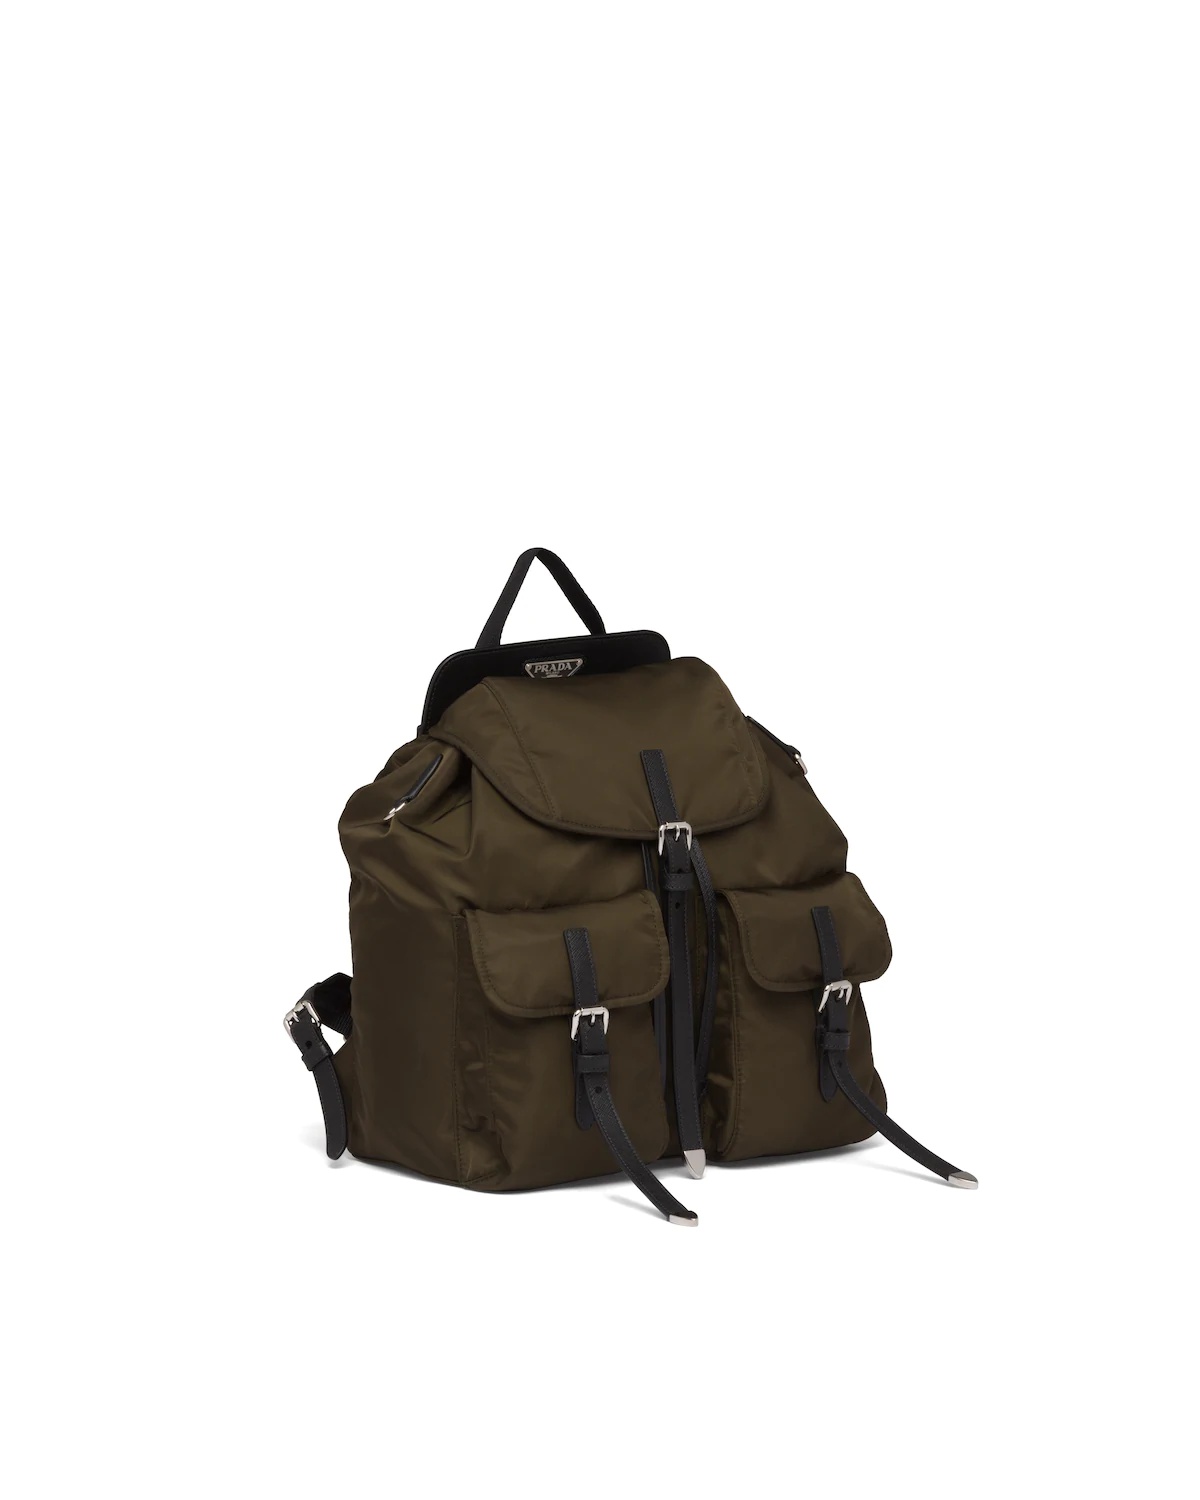 Nylon and Saffiano Leather Backpack - 3